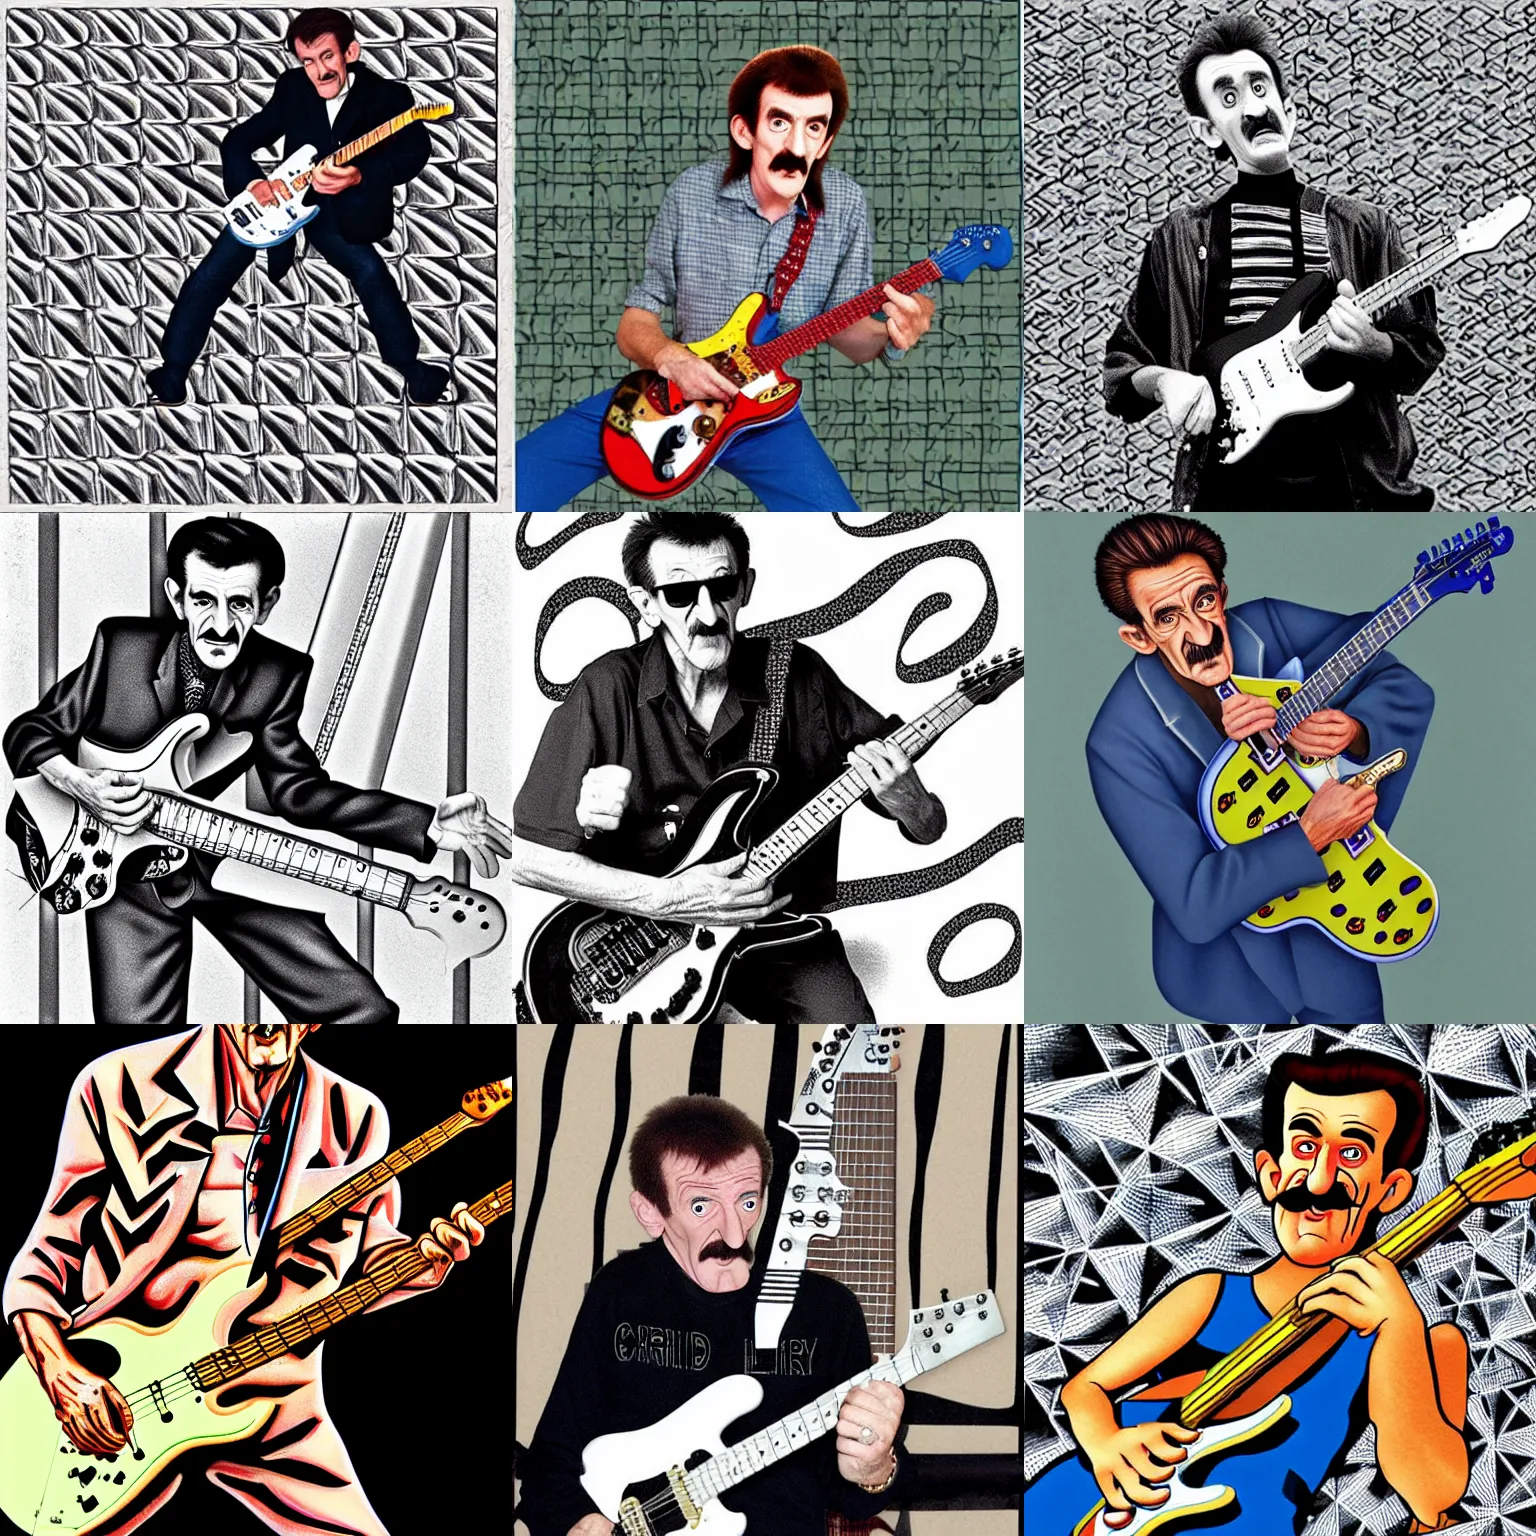 Prompt: Barry Chuckle Shredding on an electric guitar in the style of MC Escher